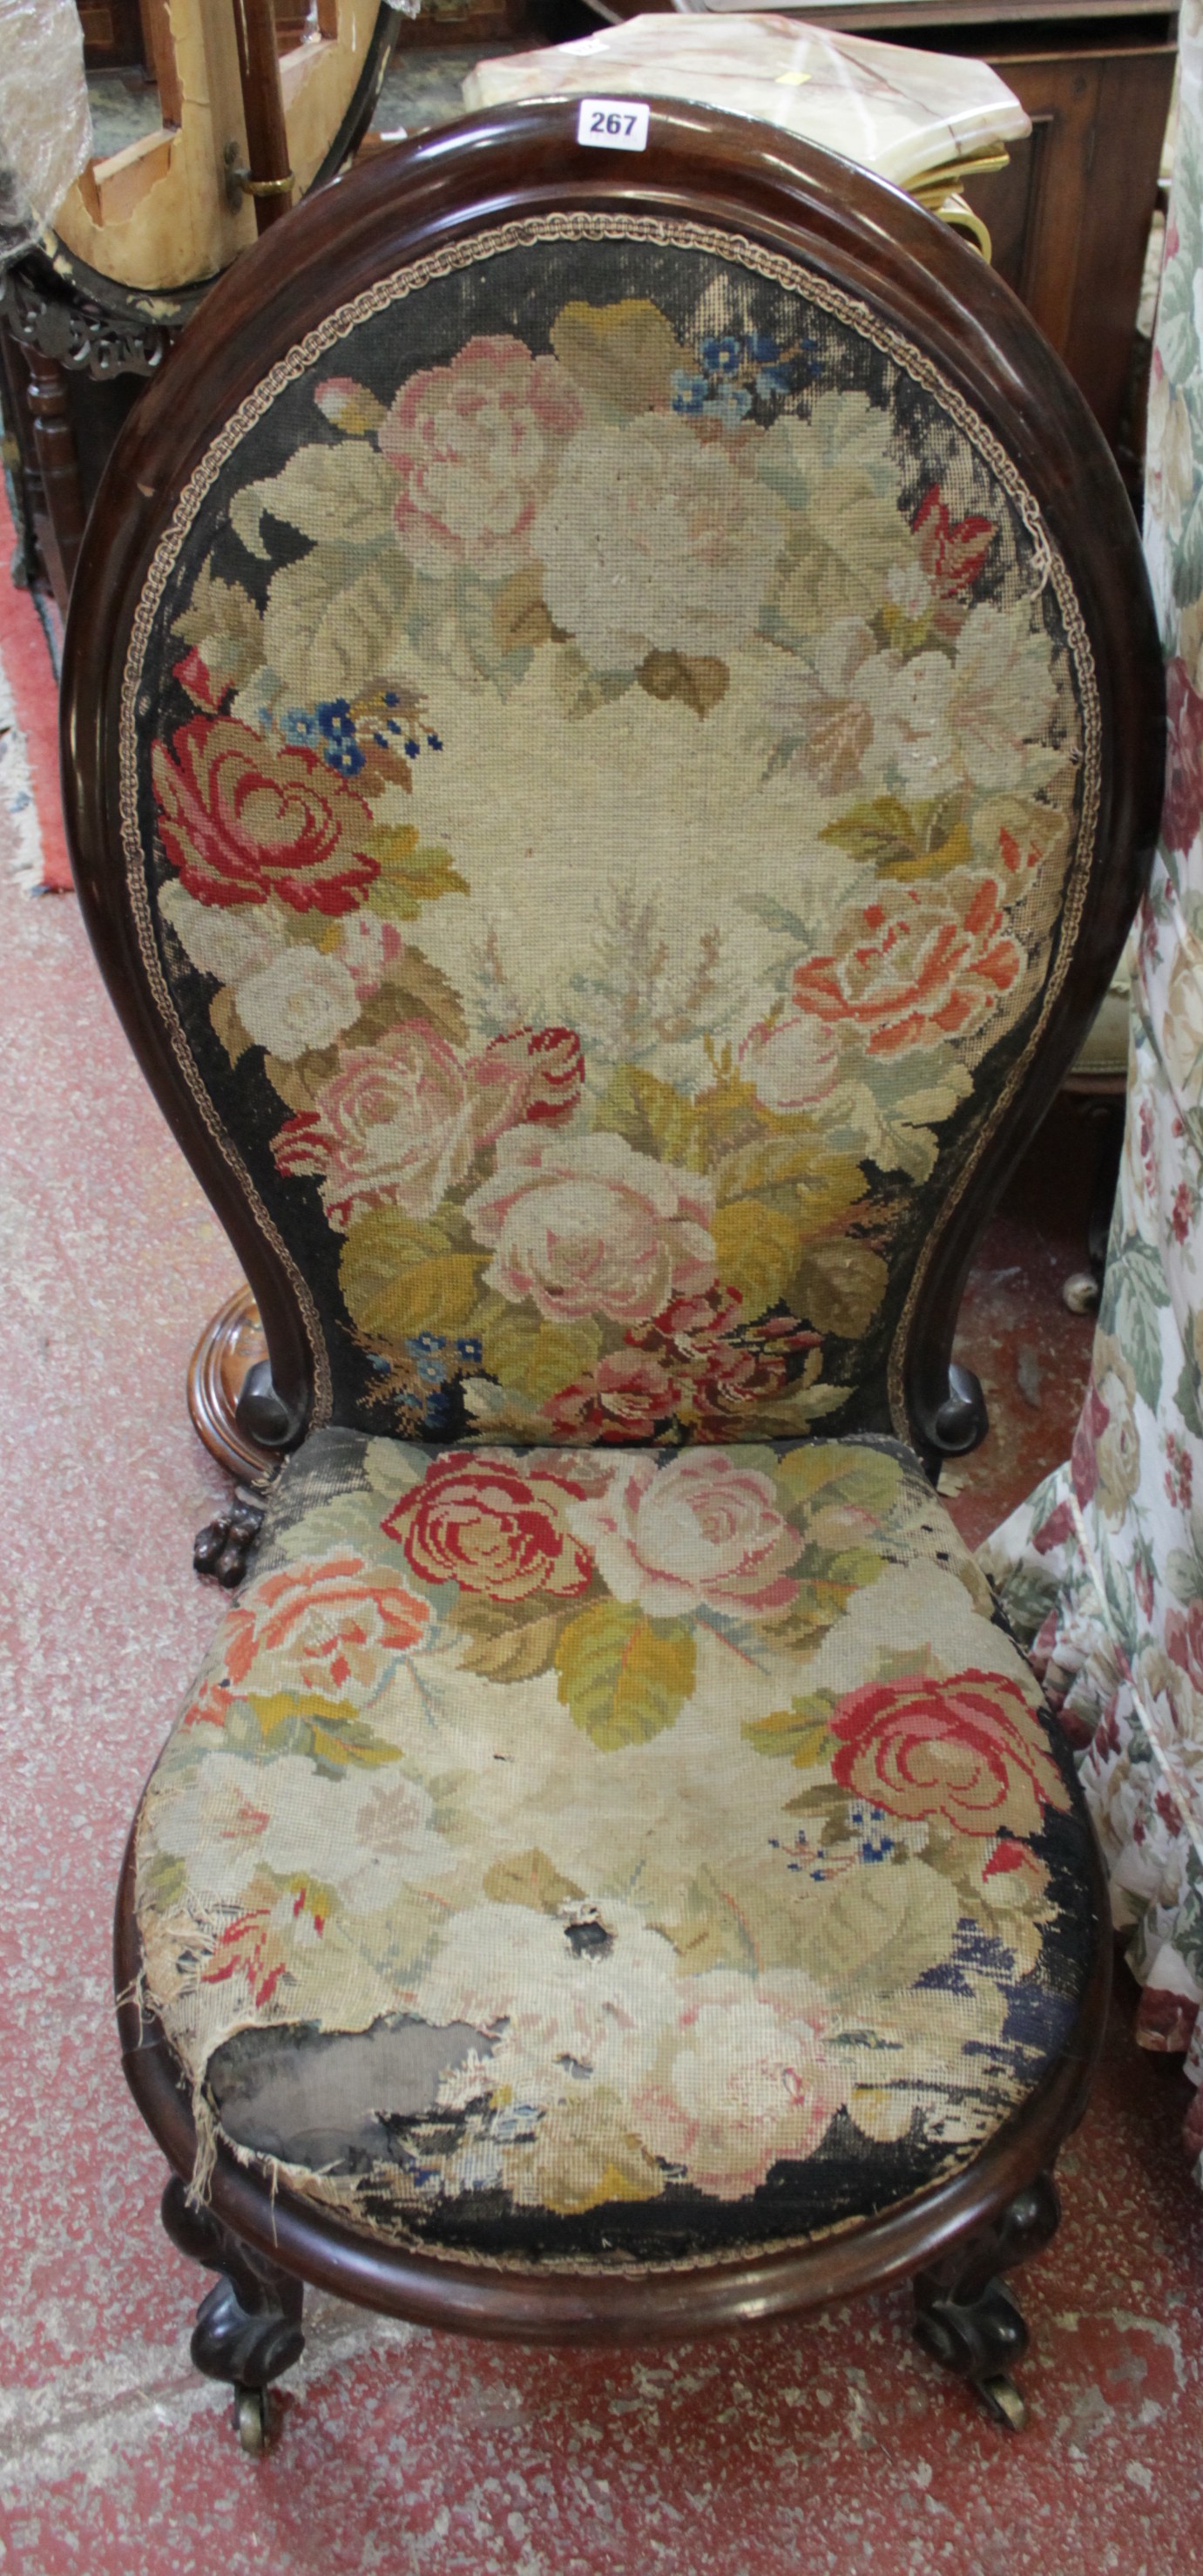 A Victorian mahogany spoonback needlework upholstered chair